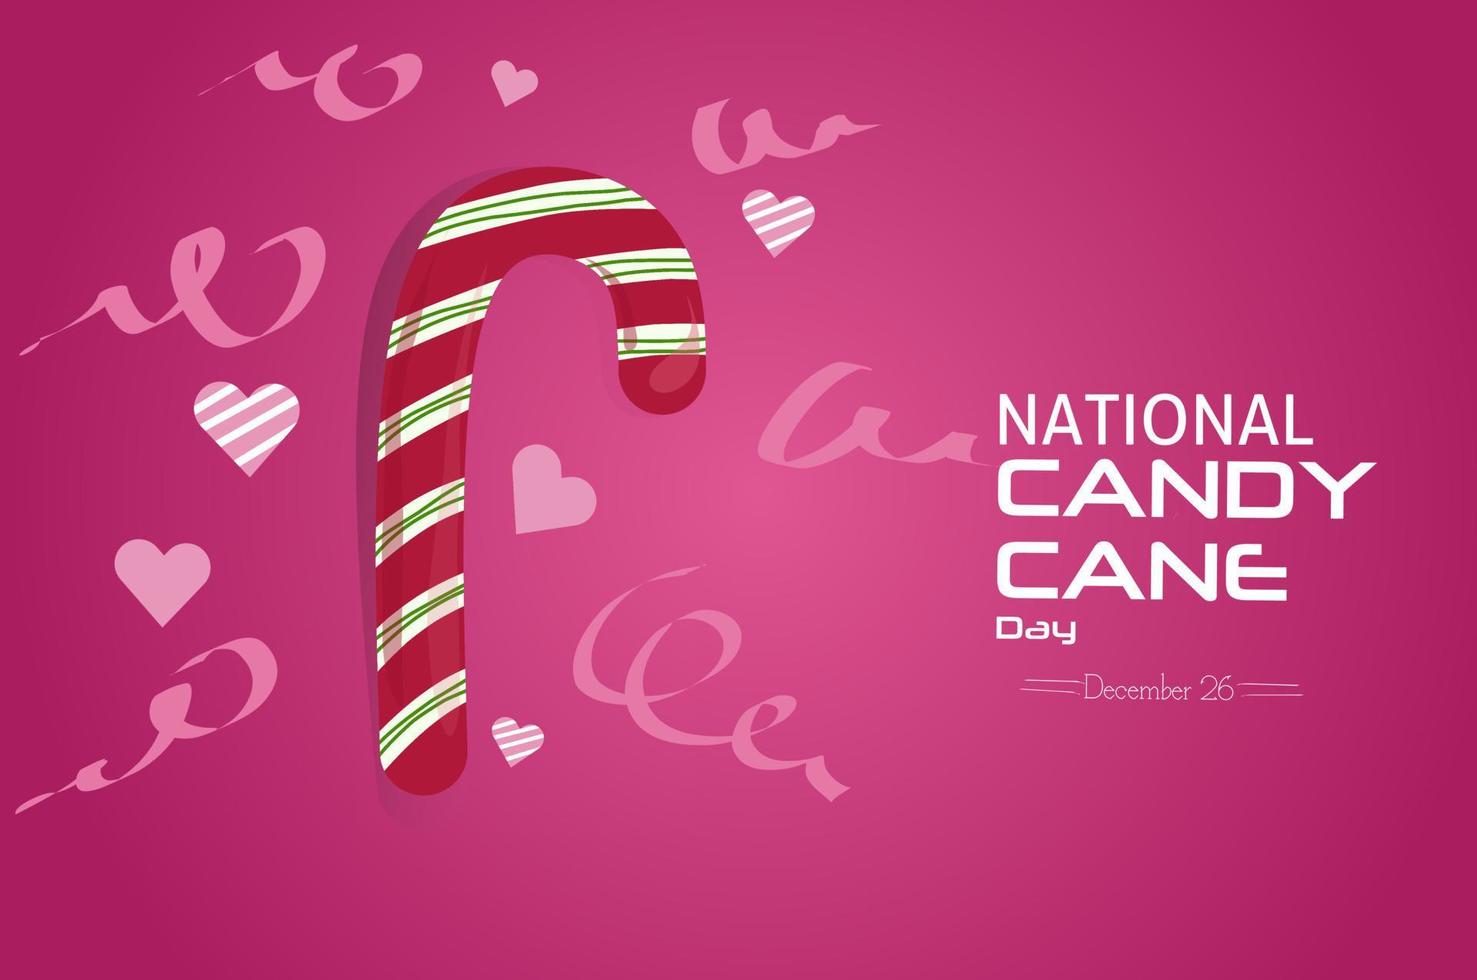 nationale candy cane day vectorillustratie vector